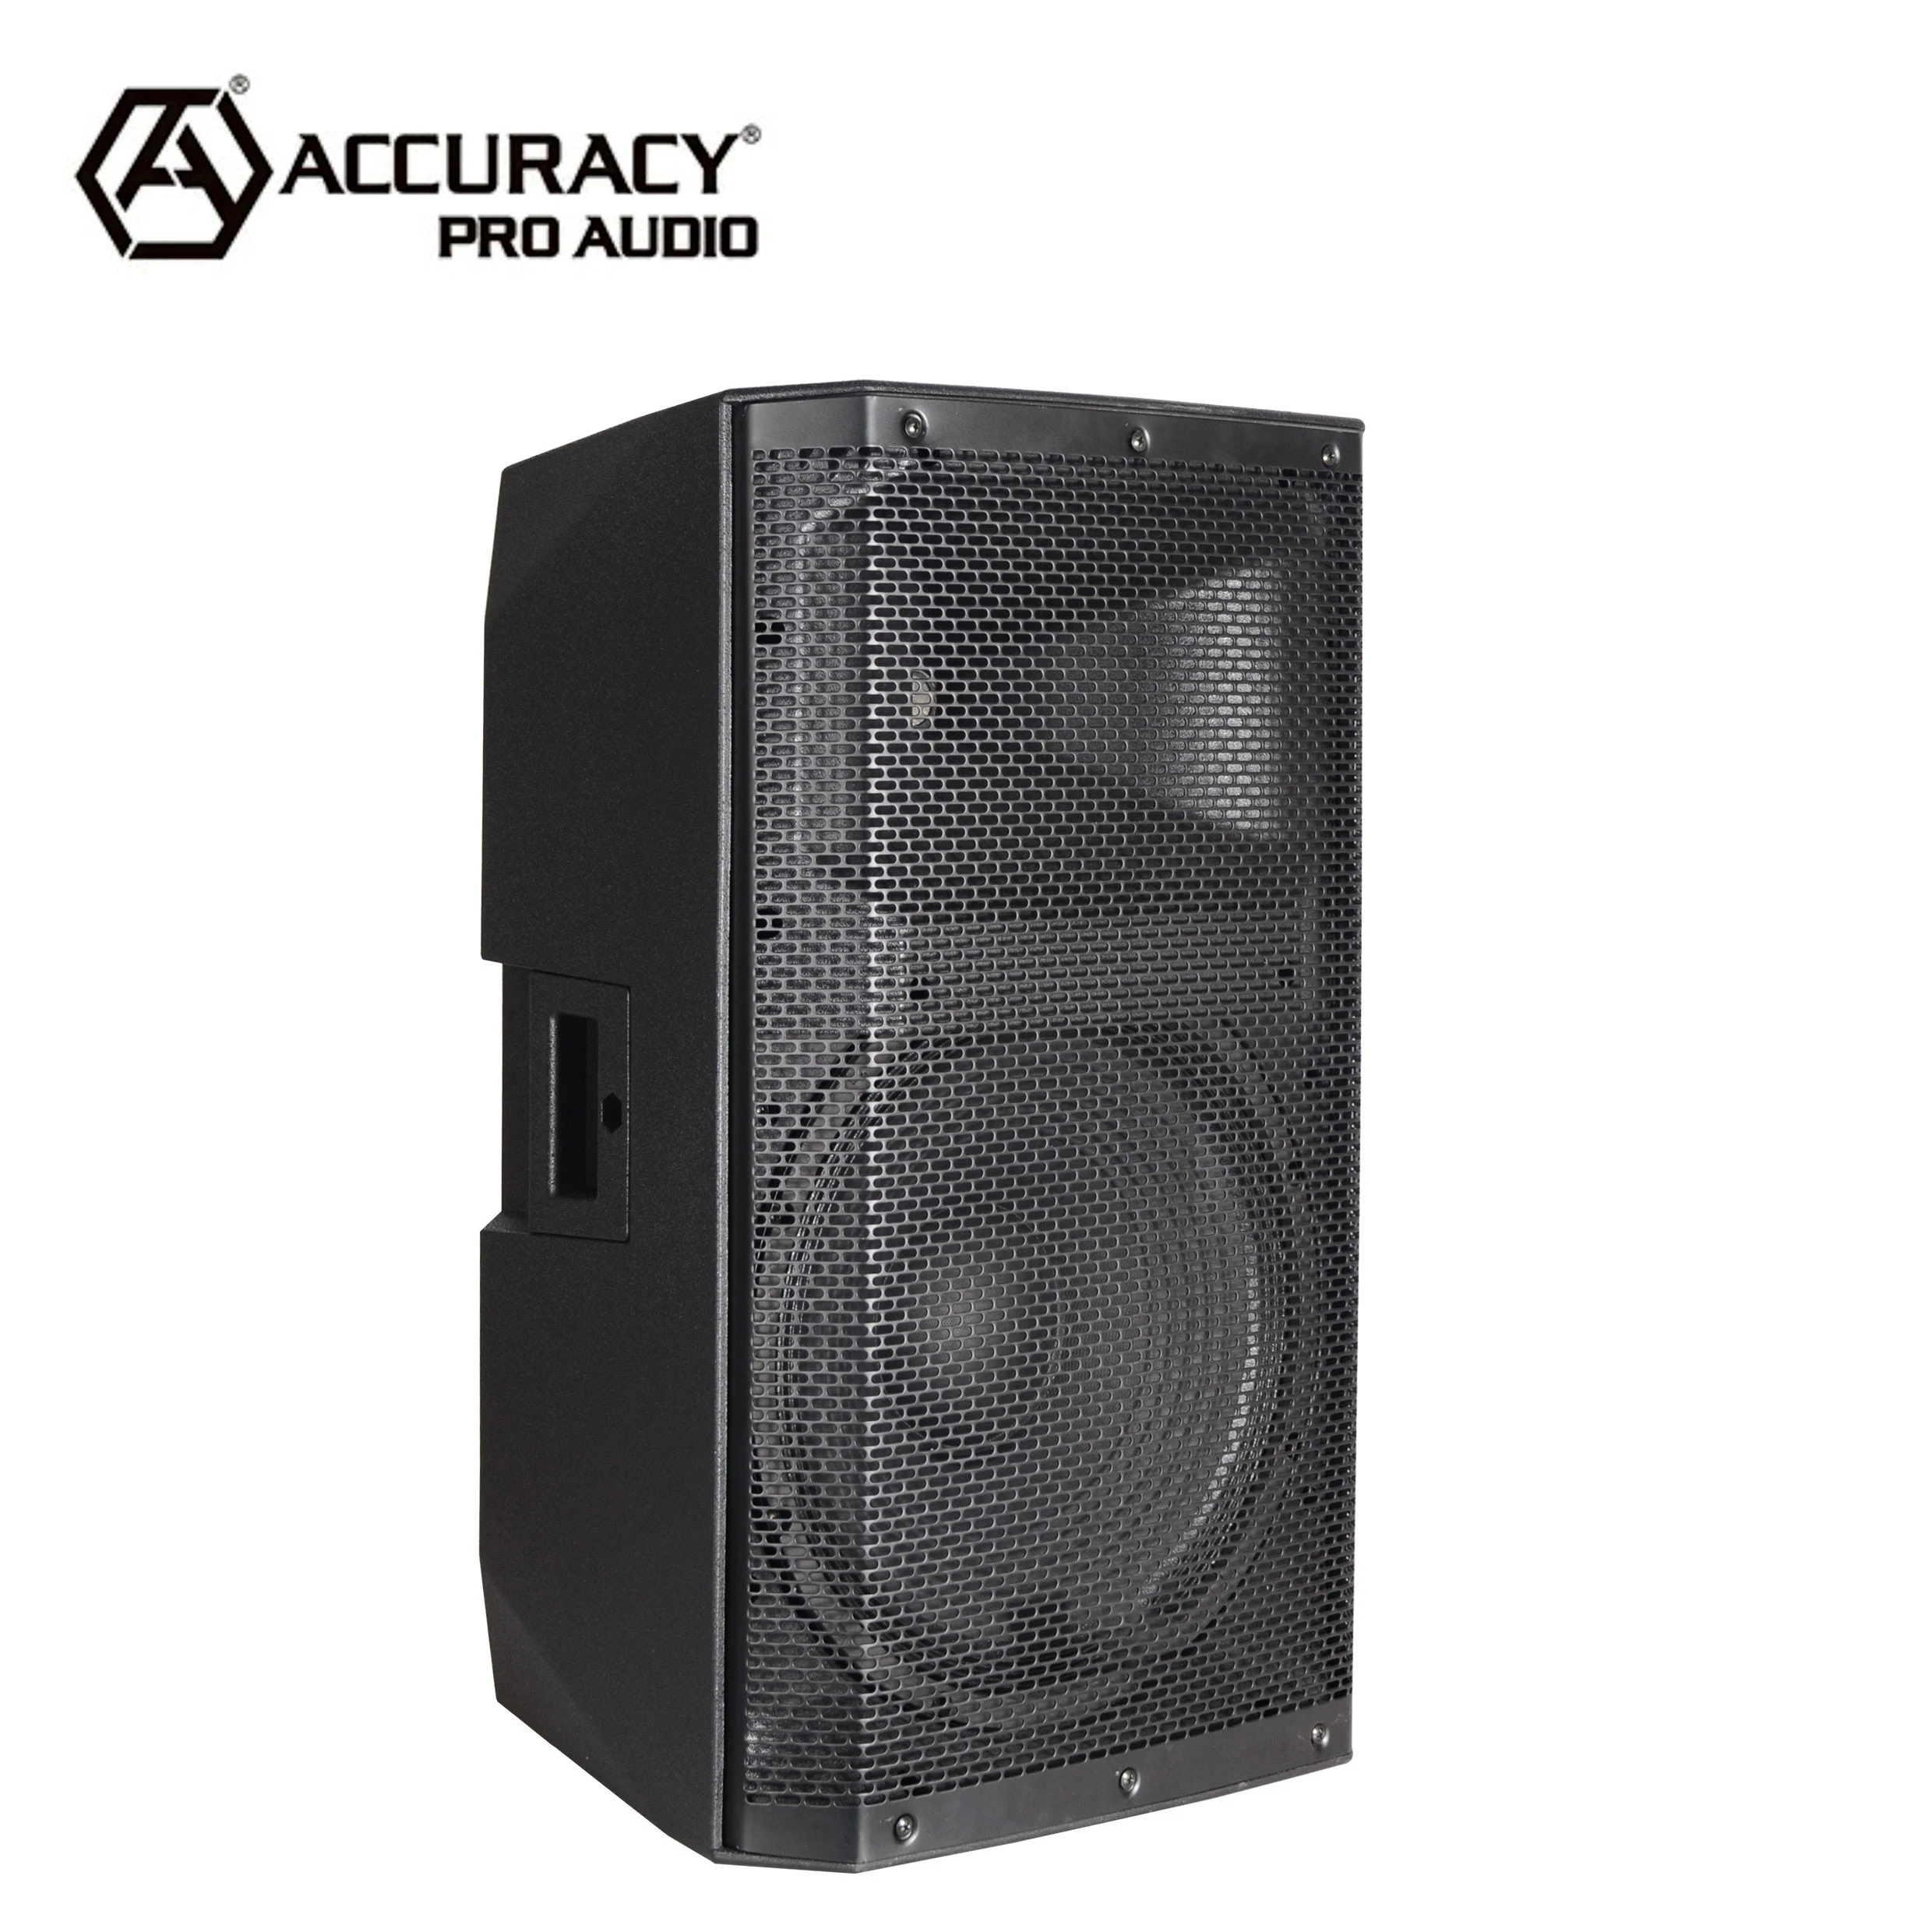 Accuracy Pro Audio CAC15ADA Professional Audio 500W 15&quot; Powered Speaker Inch Active Digital Power Amplifier Speaker System